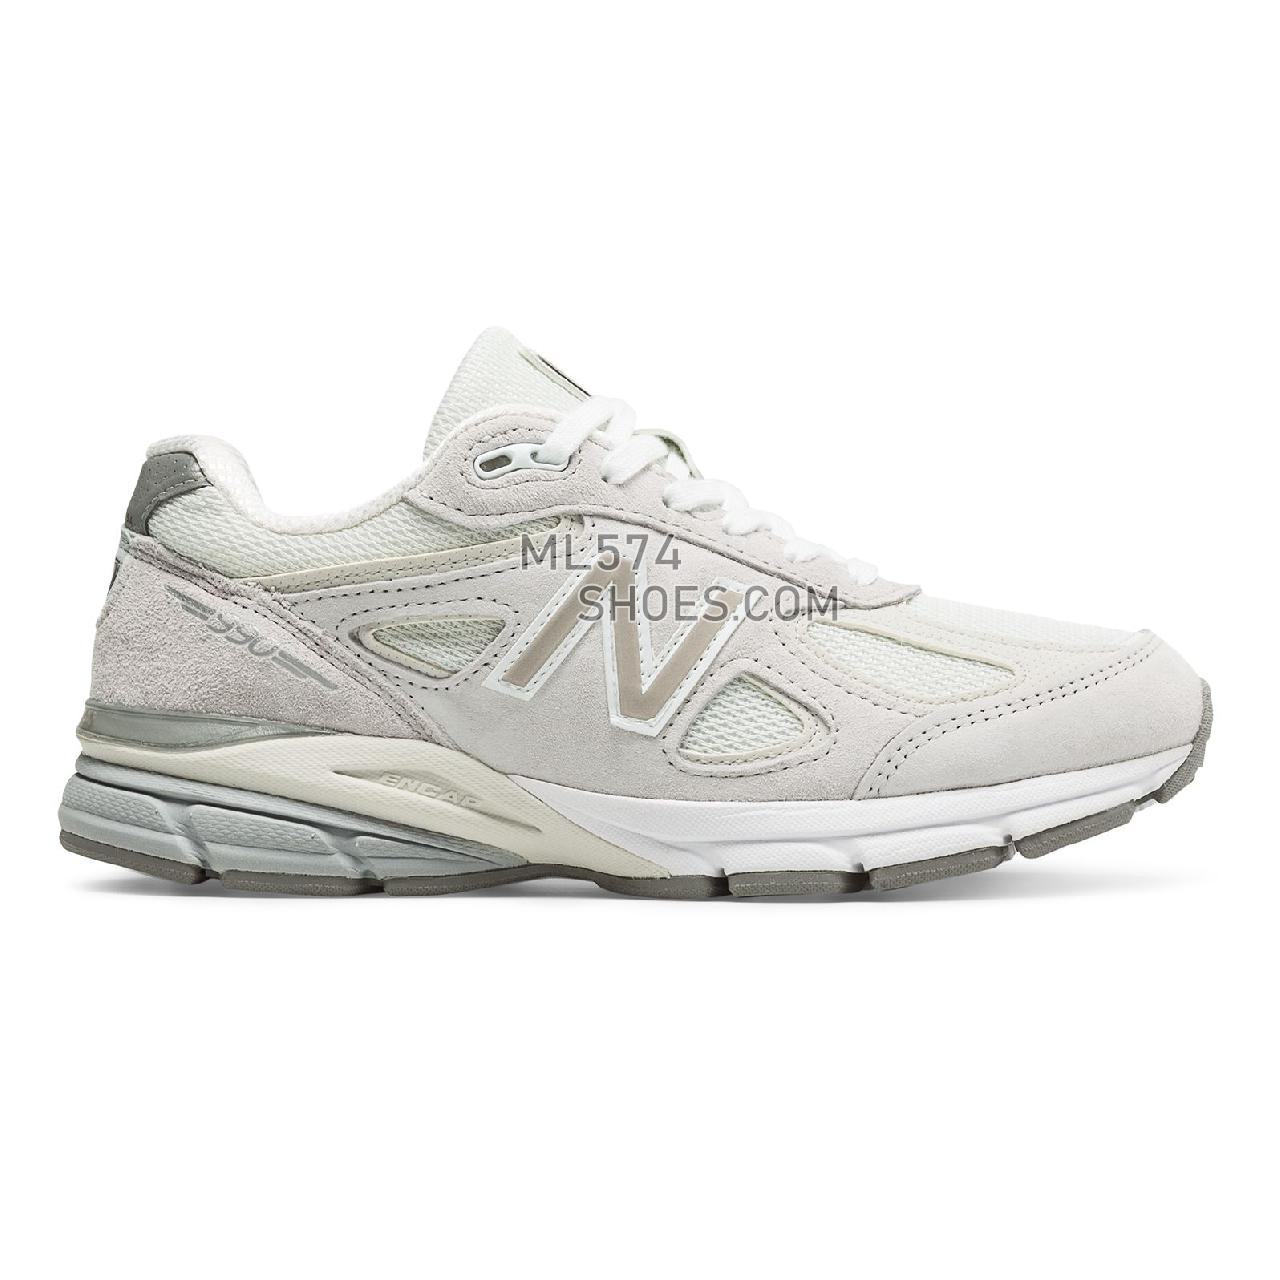 New Balance Womens 990v4 Made in US - Women's 990 - Running Nimbus Cloud with Rose Gold - W990NG4